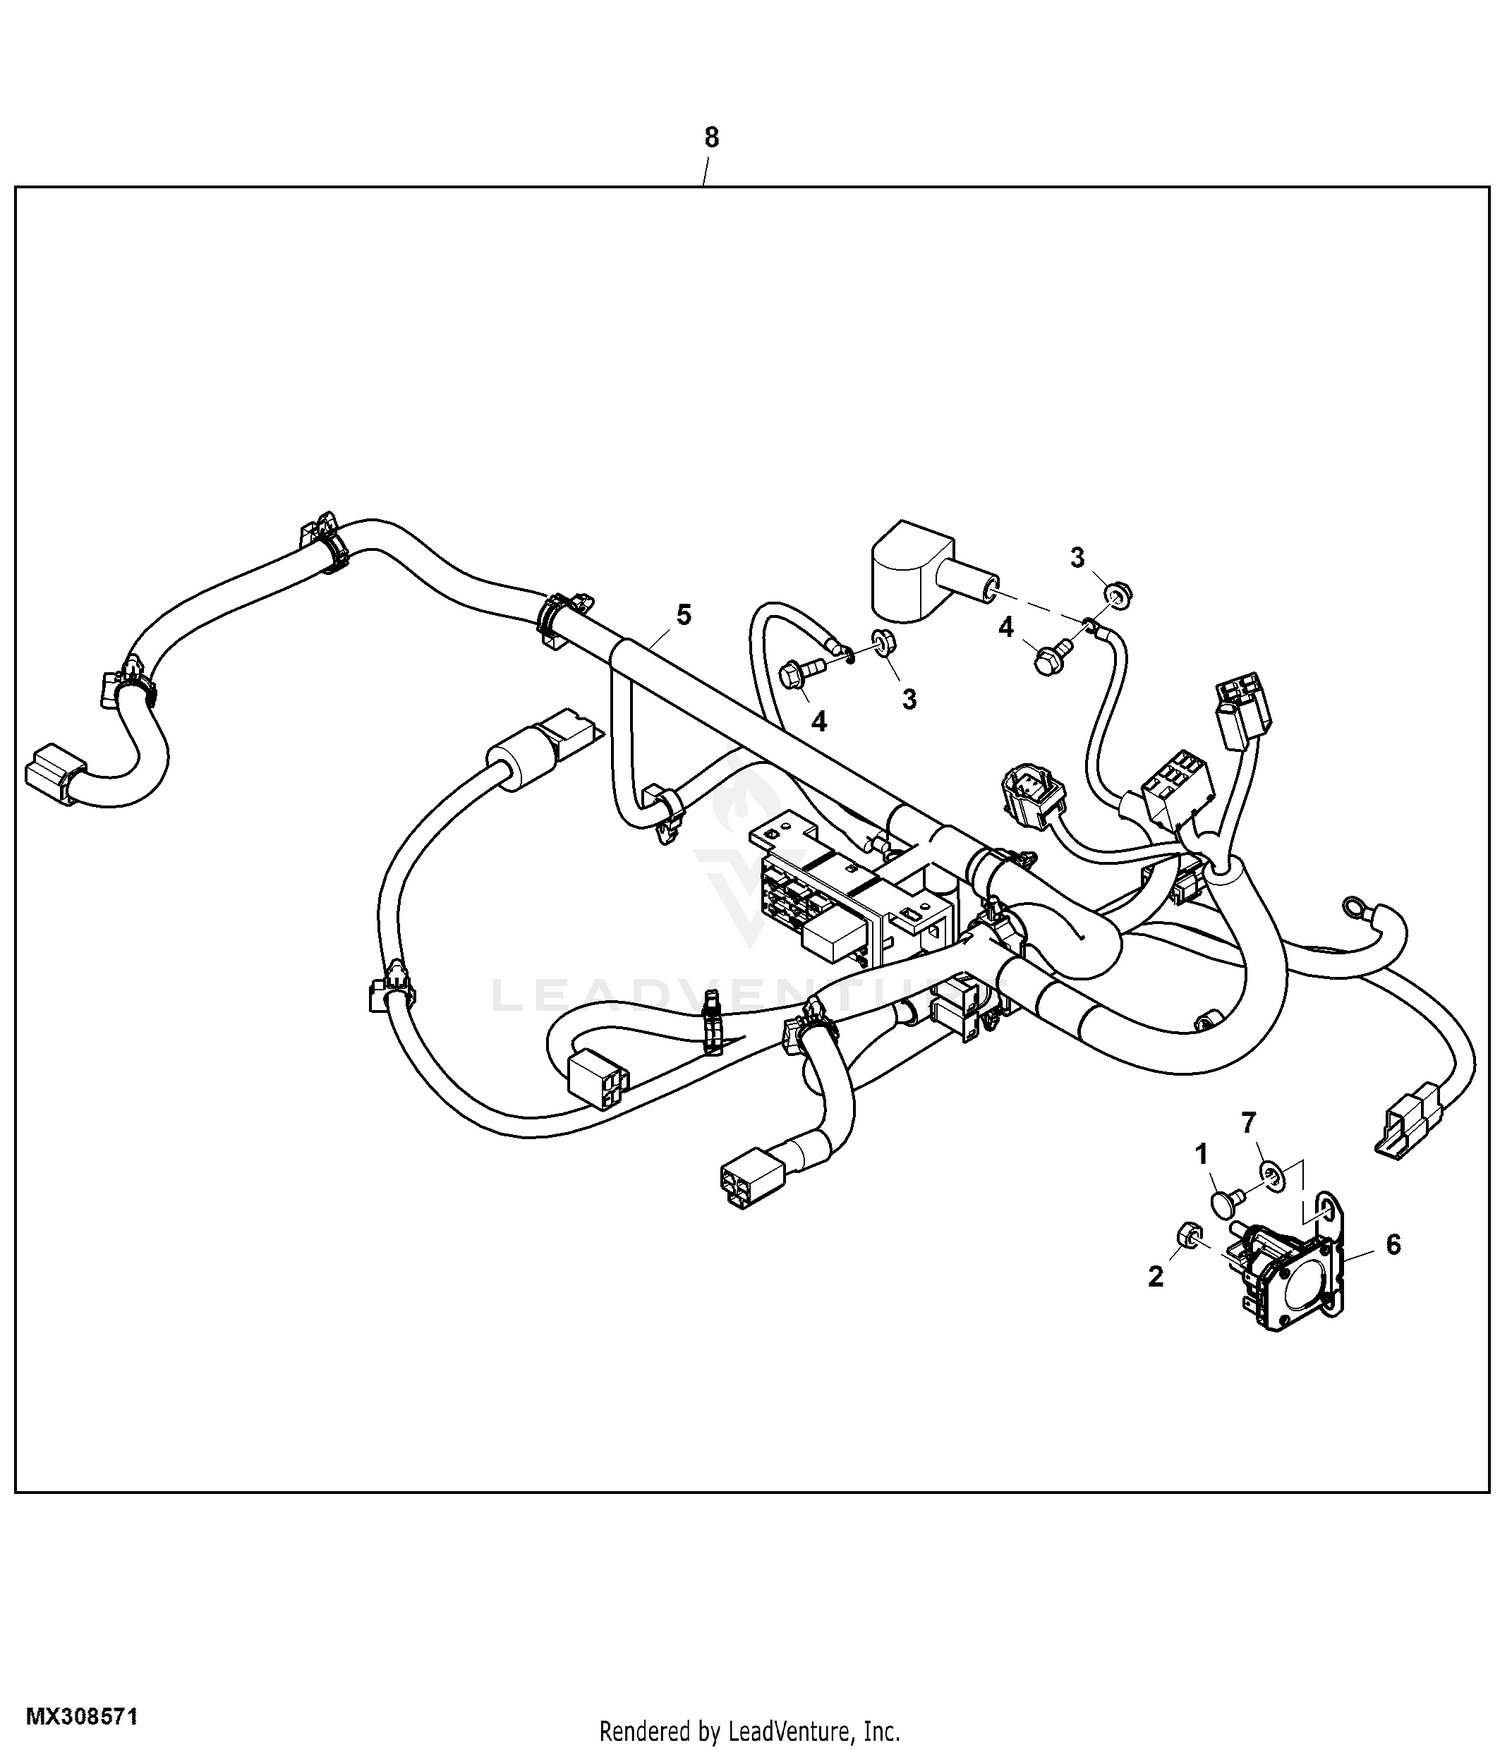 John Deere Z425 Wiring Diagram Printable Form, Templates and Letter